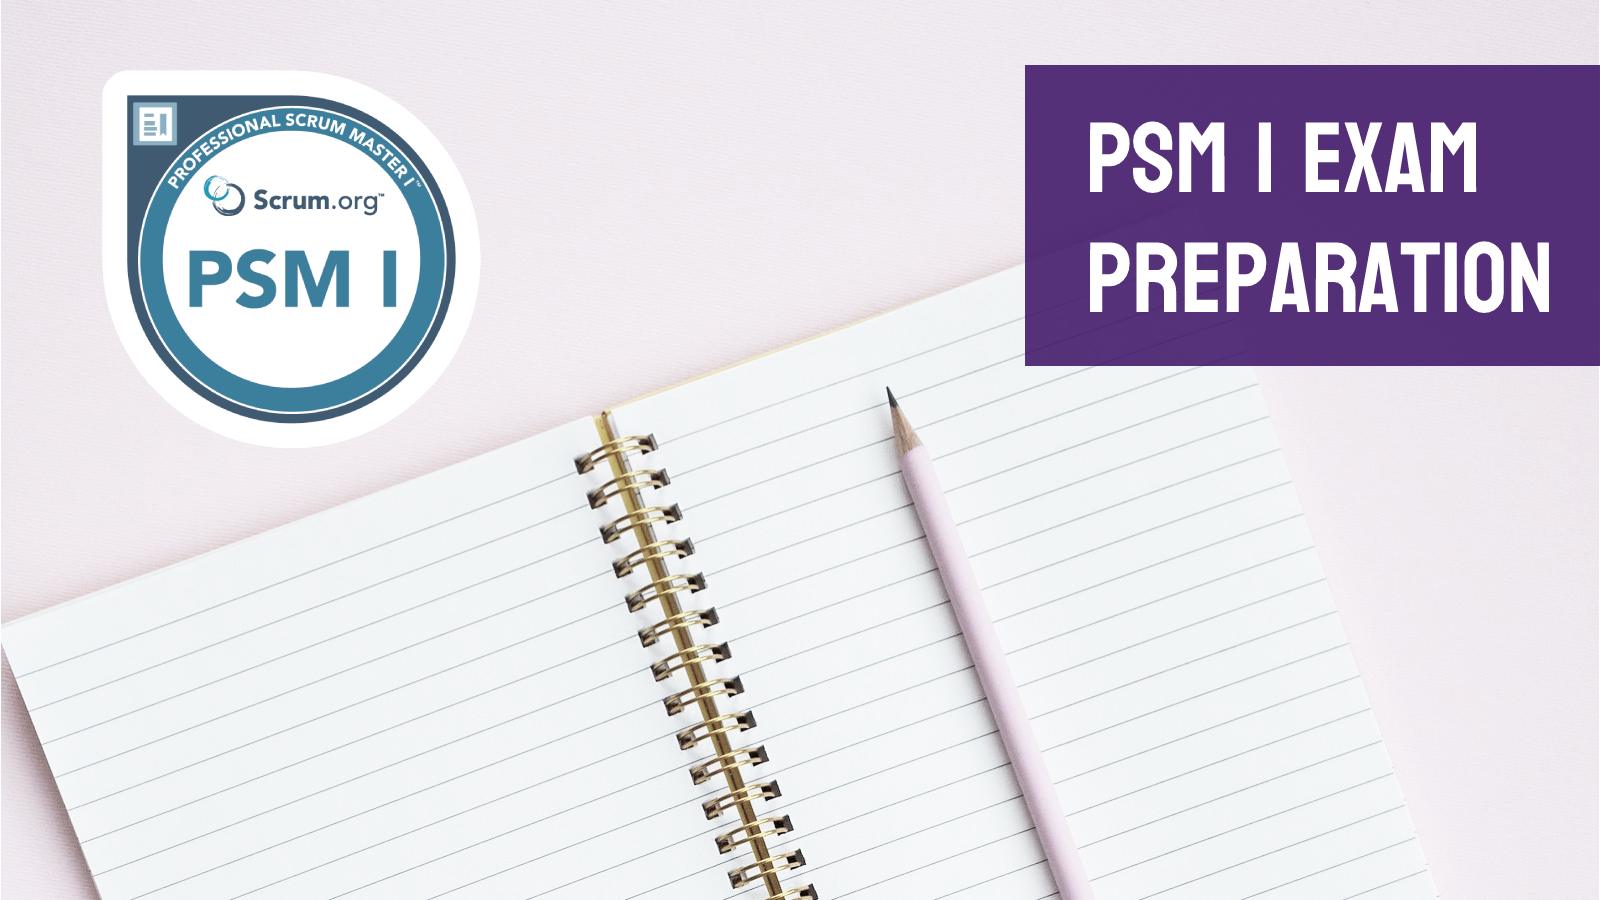 How to prepare for the PSM I certification exam and successfully pass it on the first try?